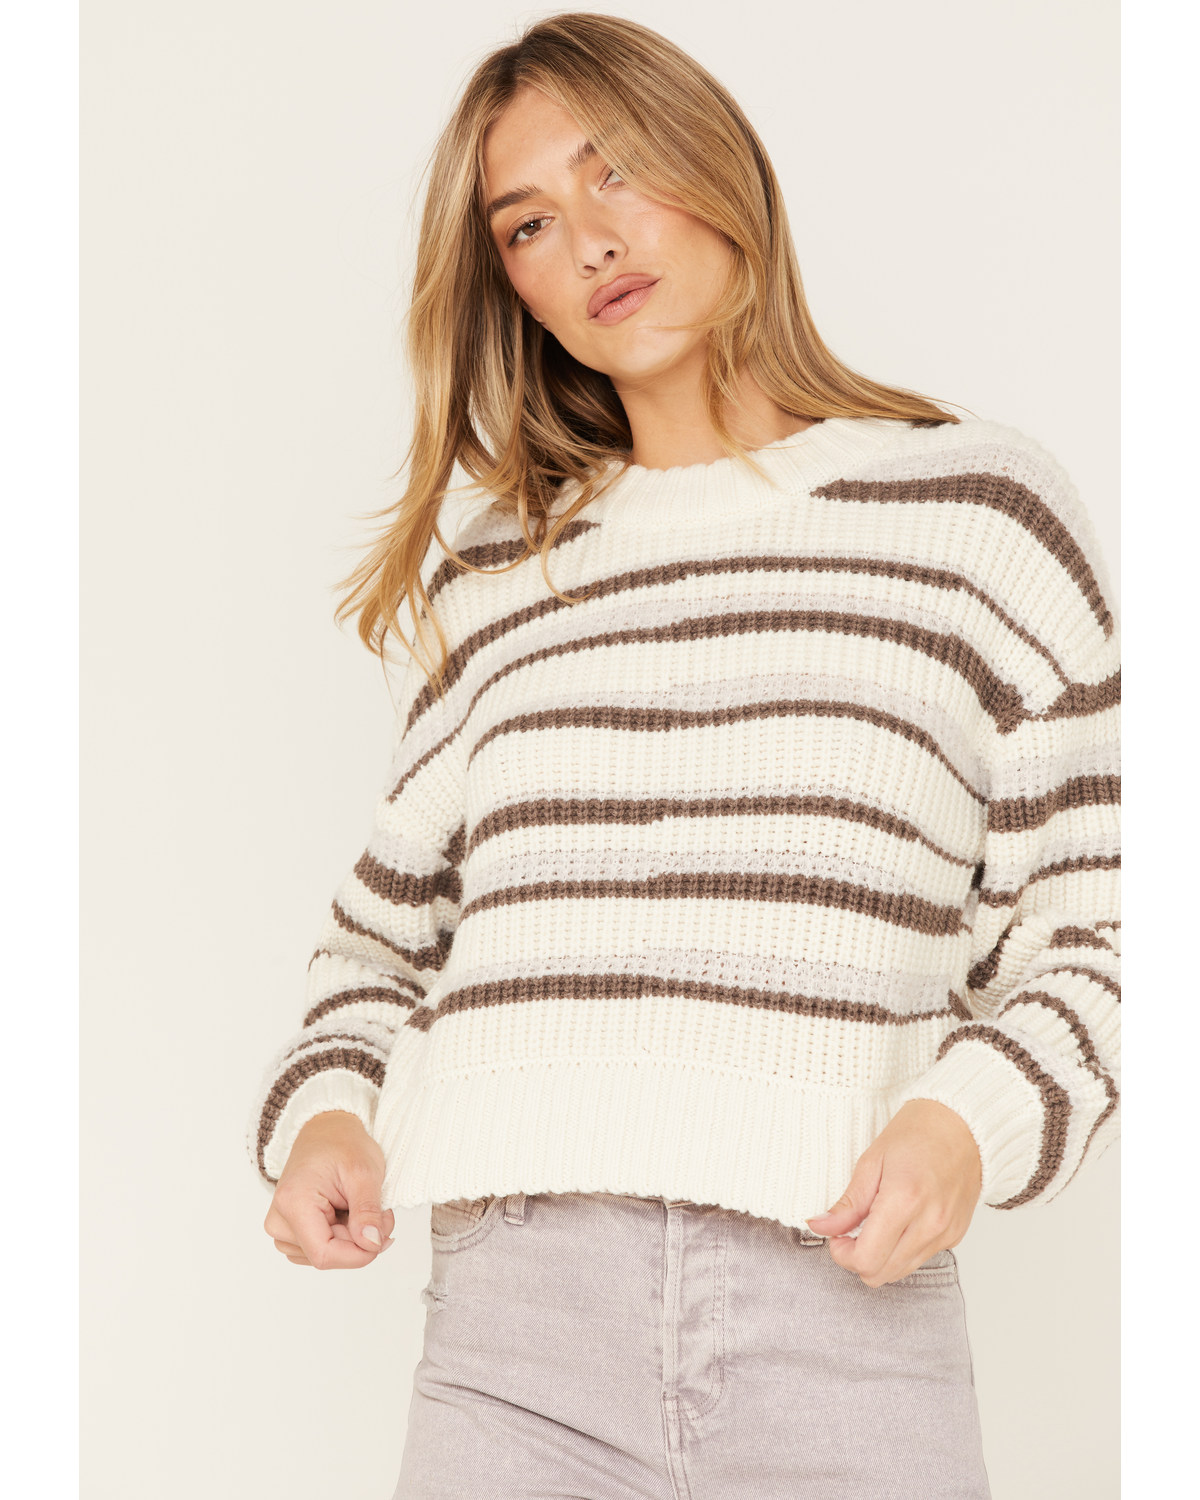 Cleo + Wolf Women's Abstract Stripe Cropped Knit Sweater